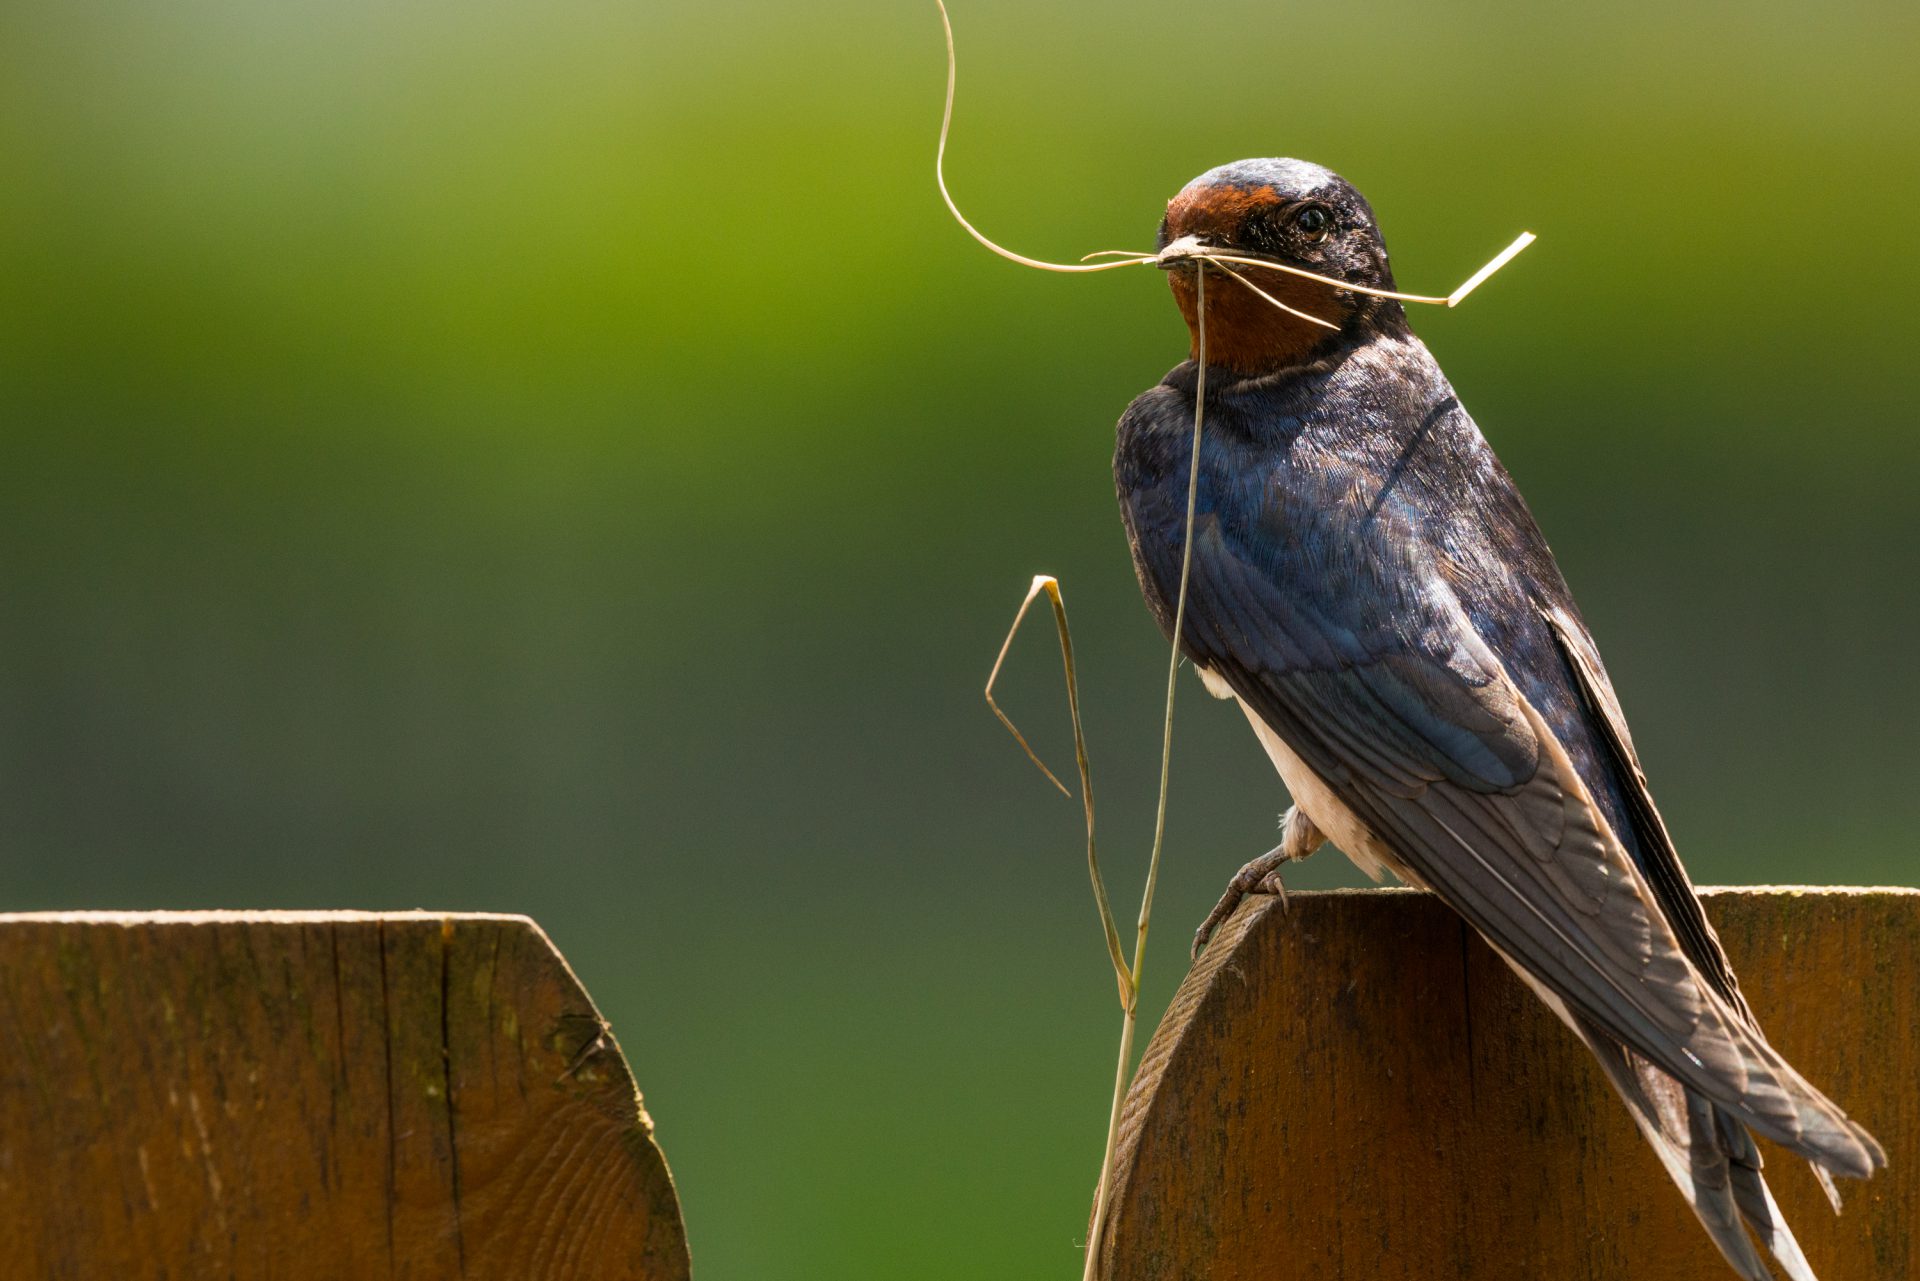 Barn Swallow with nesting material